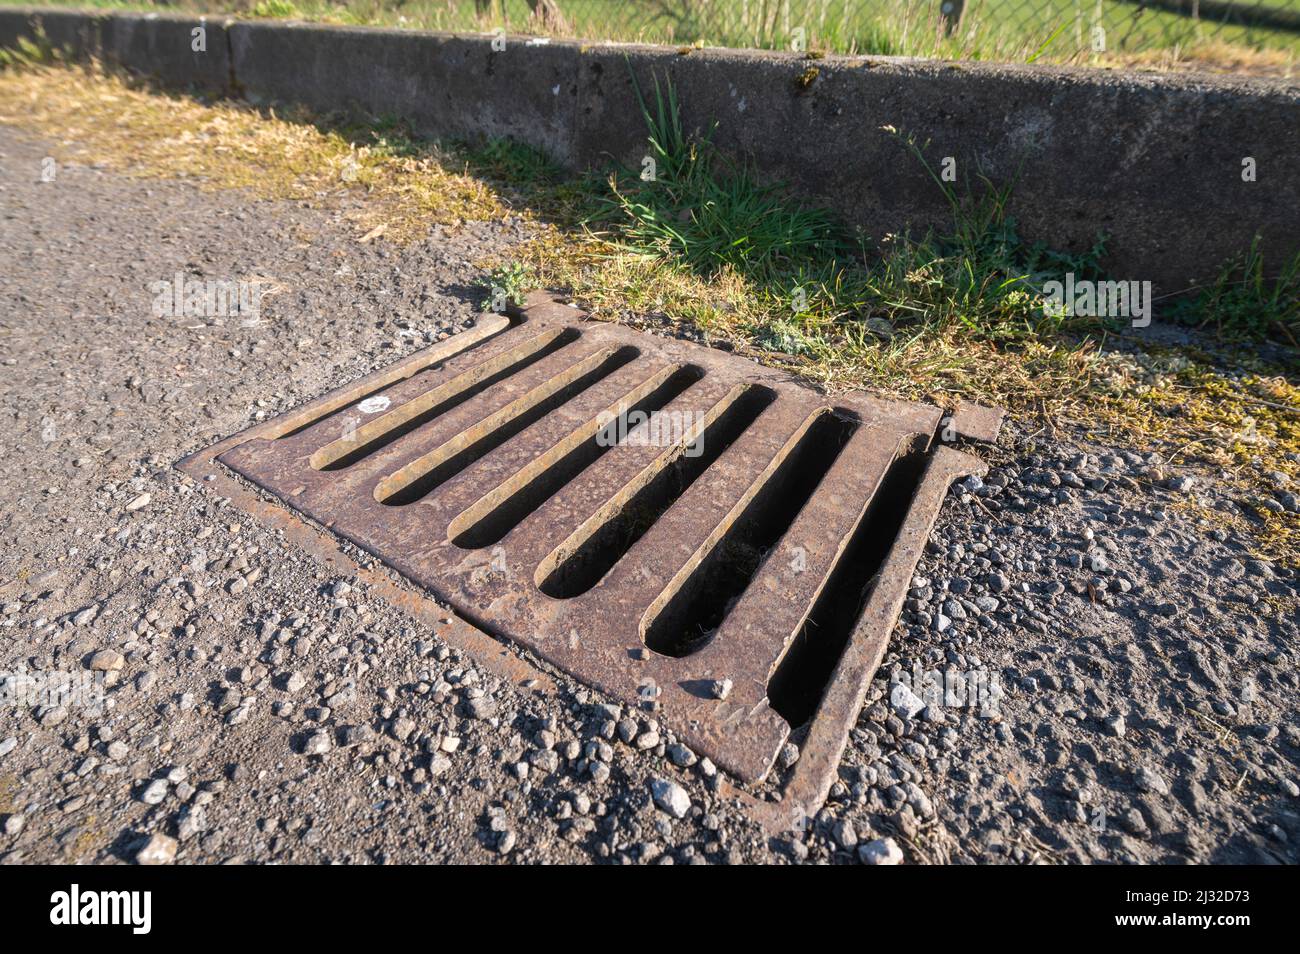 Weeds growing in road gutter and drain, Carmarthenshire, Wales, UK Stock Photo